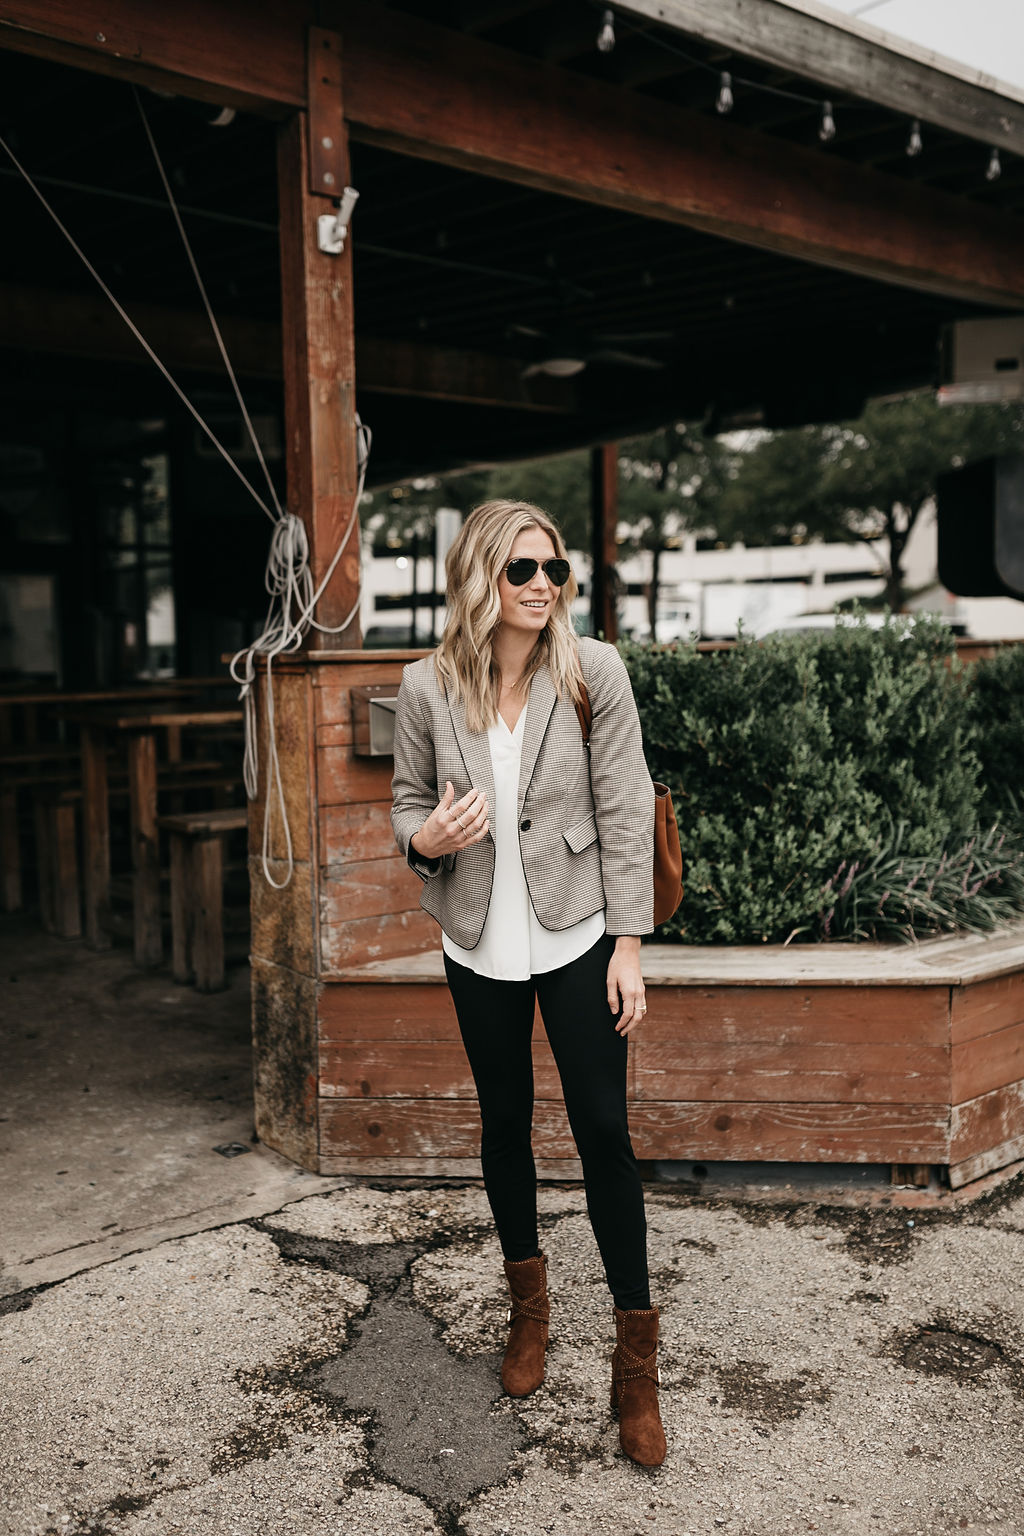  3 networking outfits from Ann Taylor